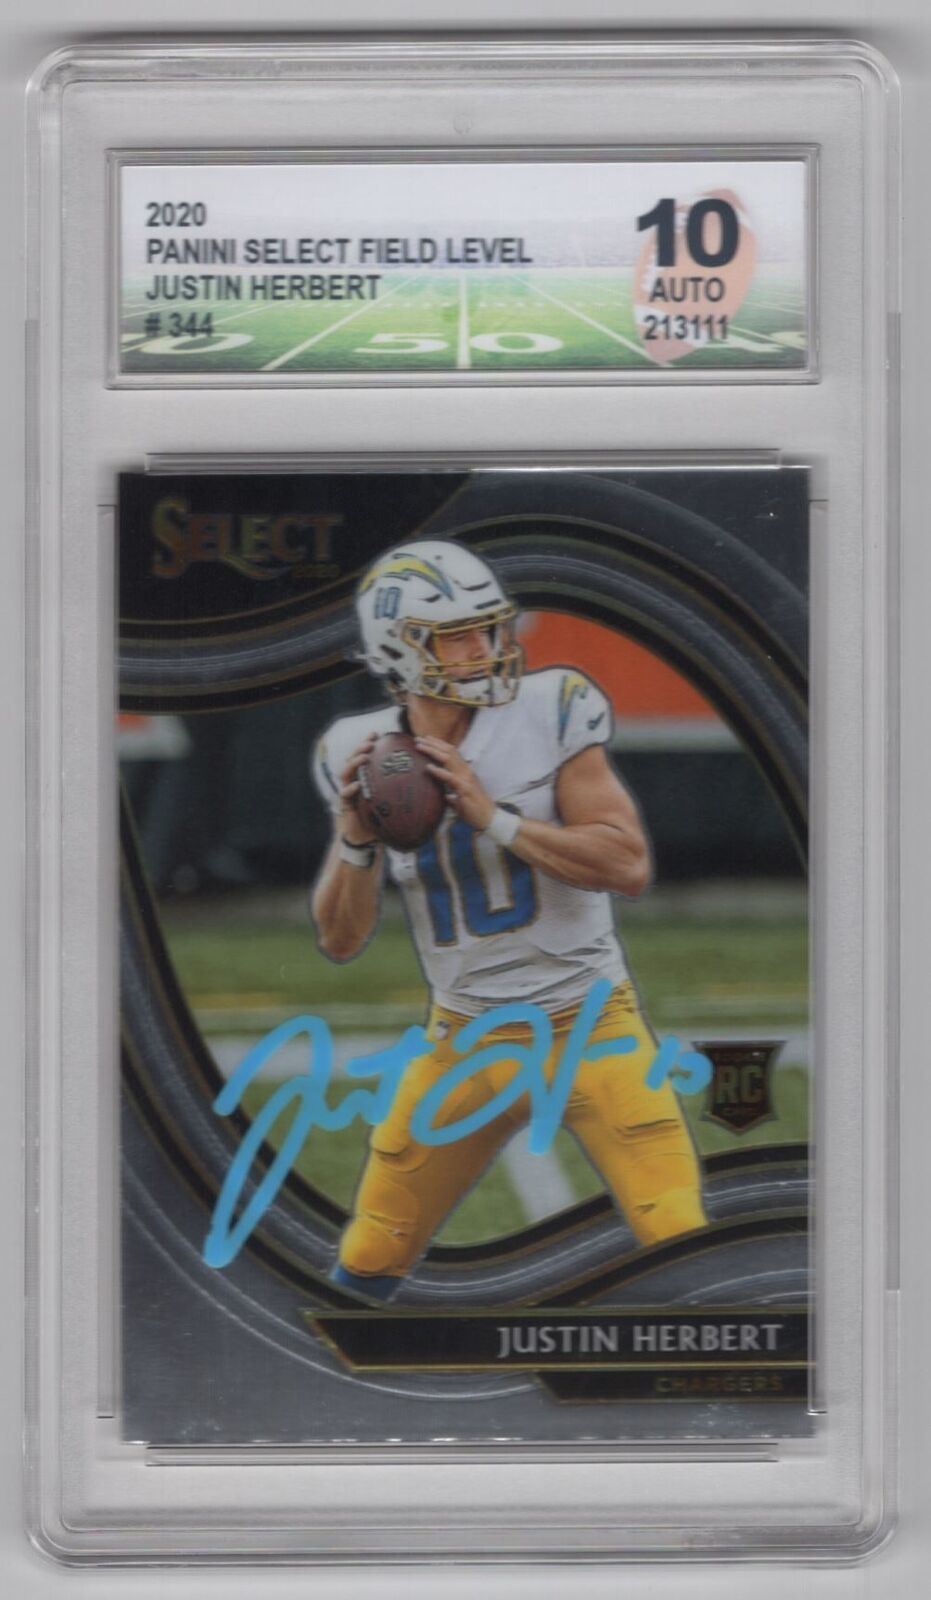 2020 Panini Select Field Level Justin Herbert RC Auto BGS Chargers #344